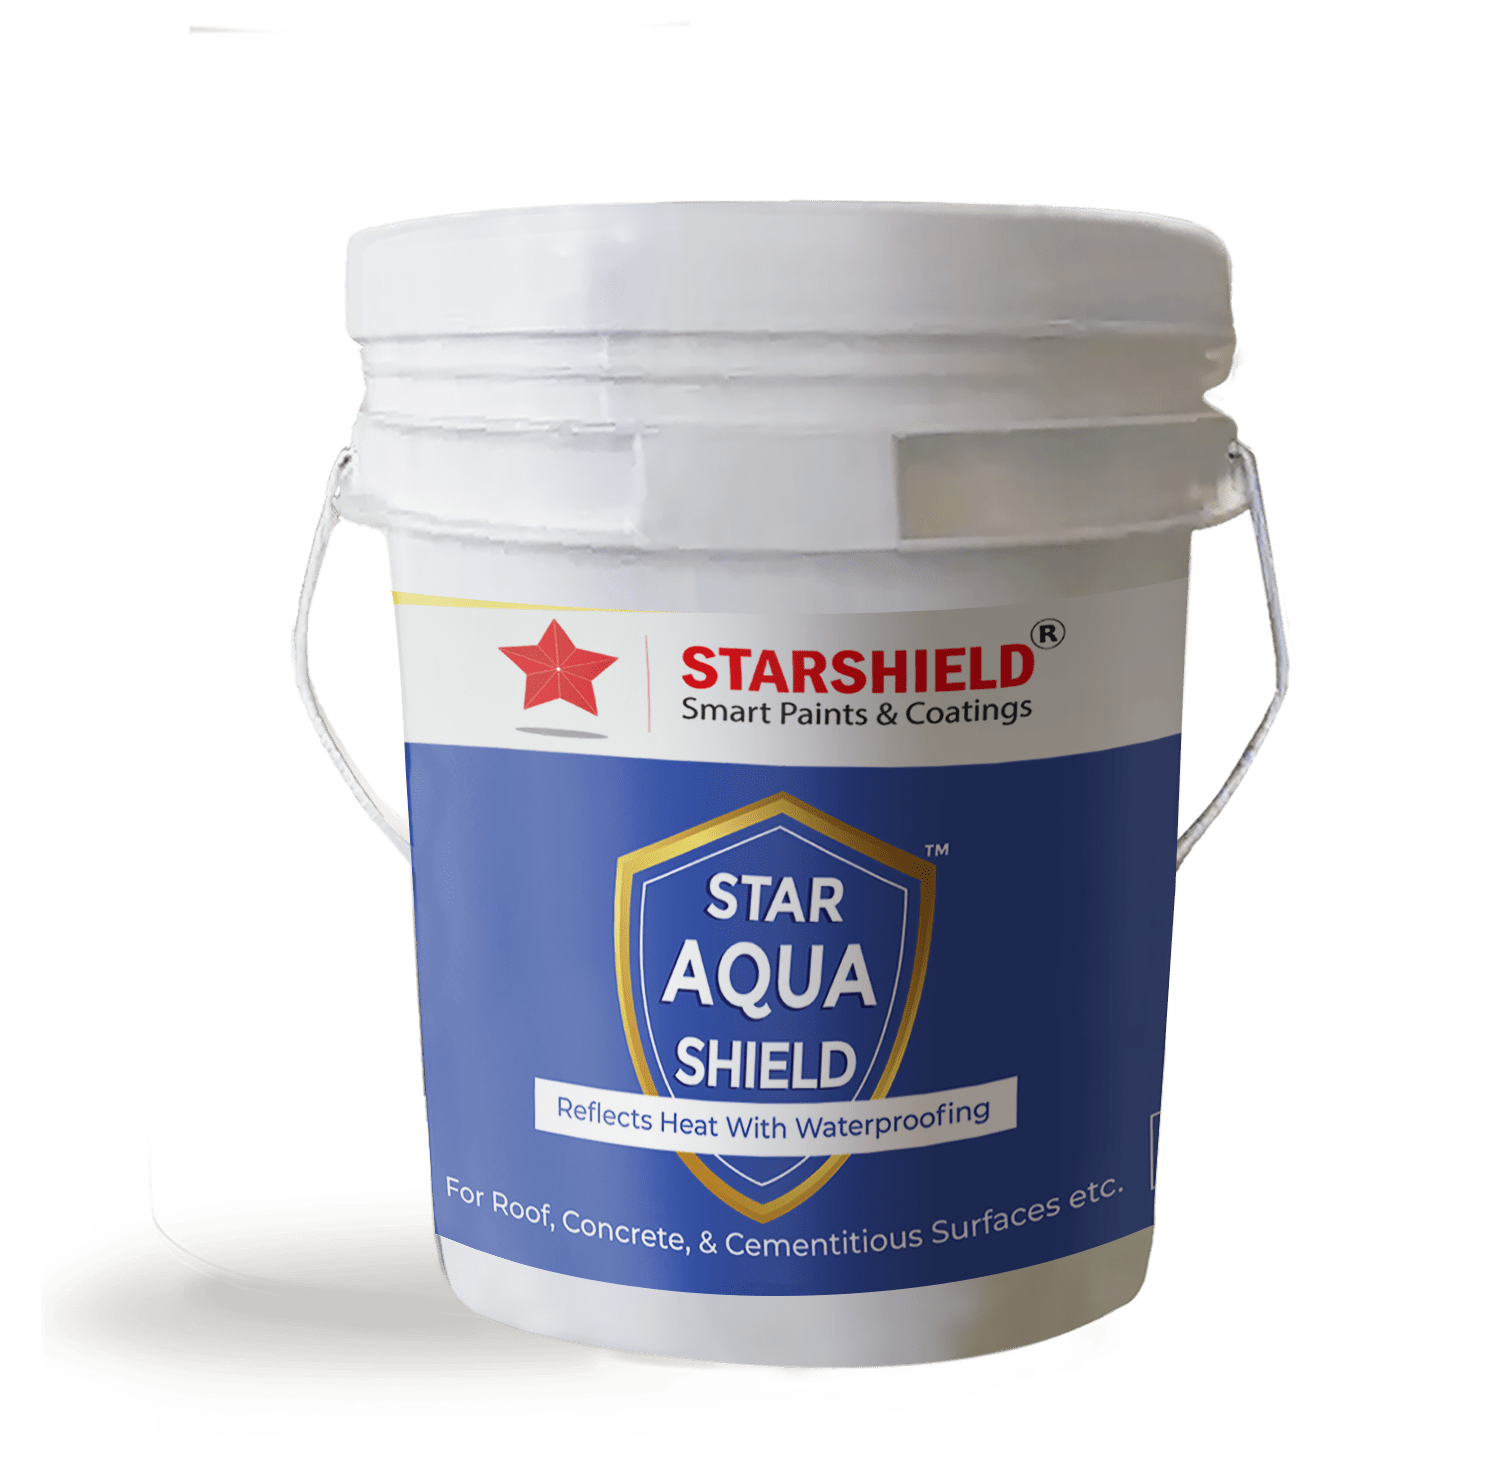 Say goodbye to dampness with Star Aqua Shield. Top-quality roof waterproofing products are available in India.